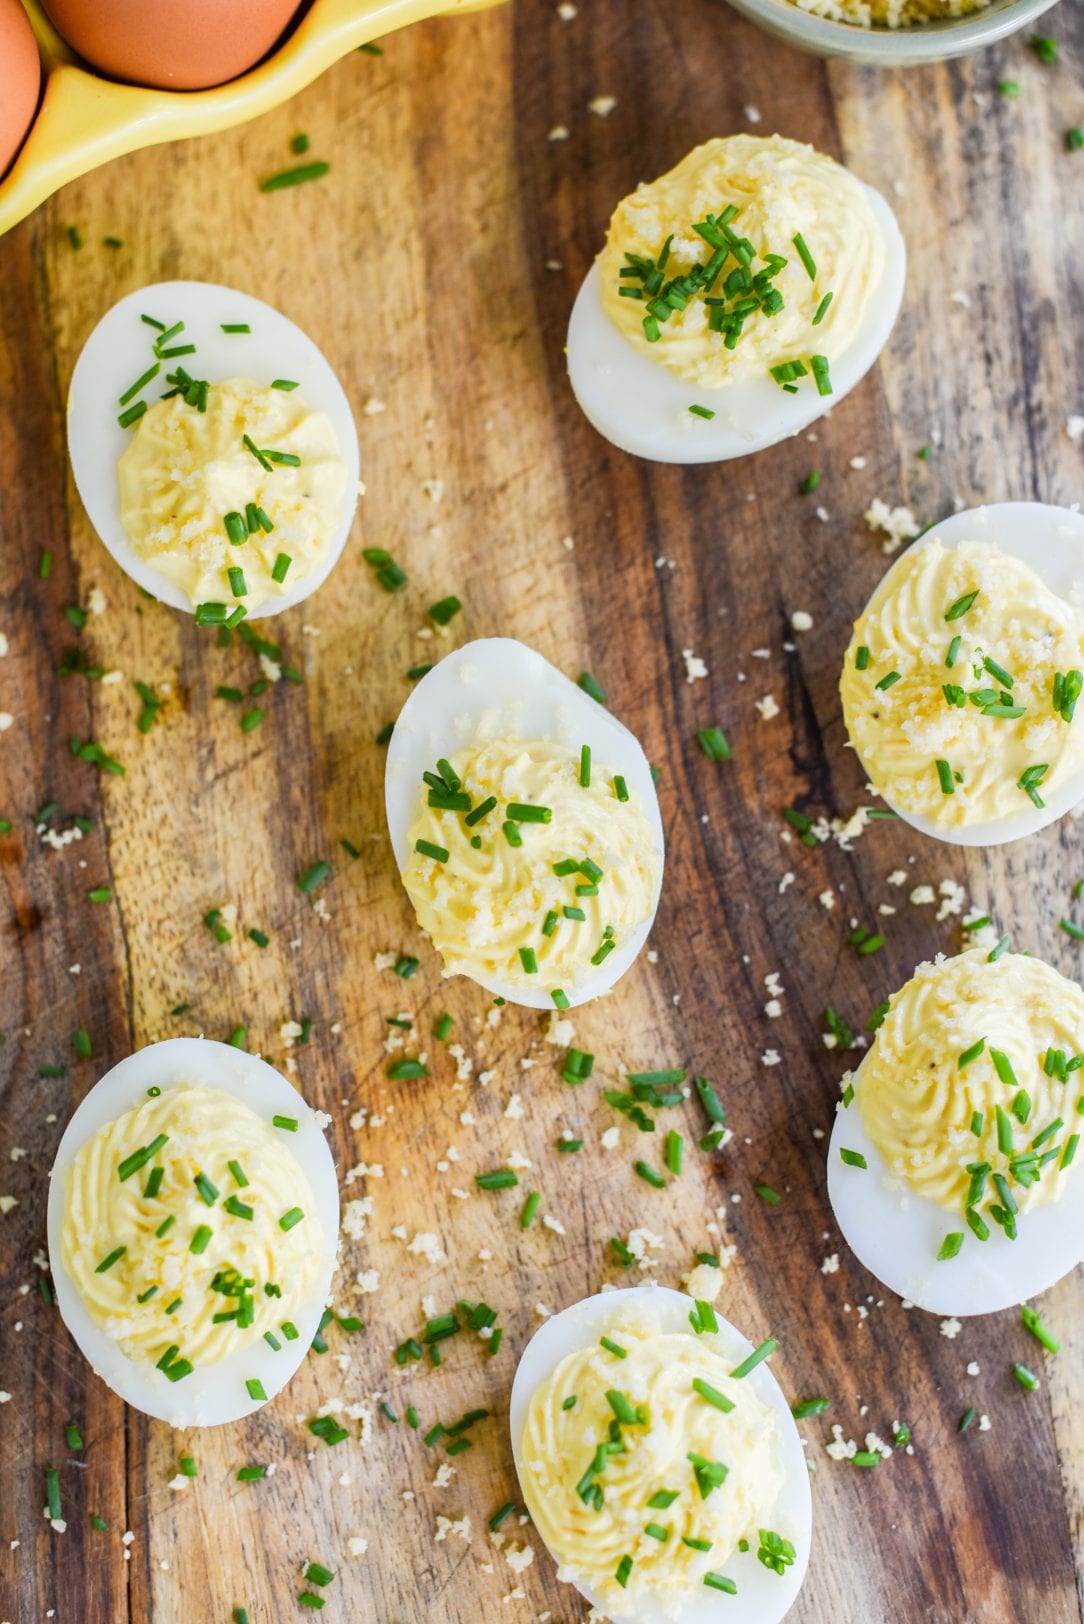 Sour Cream and Cheddar Deviled Eggs